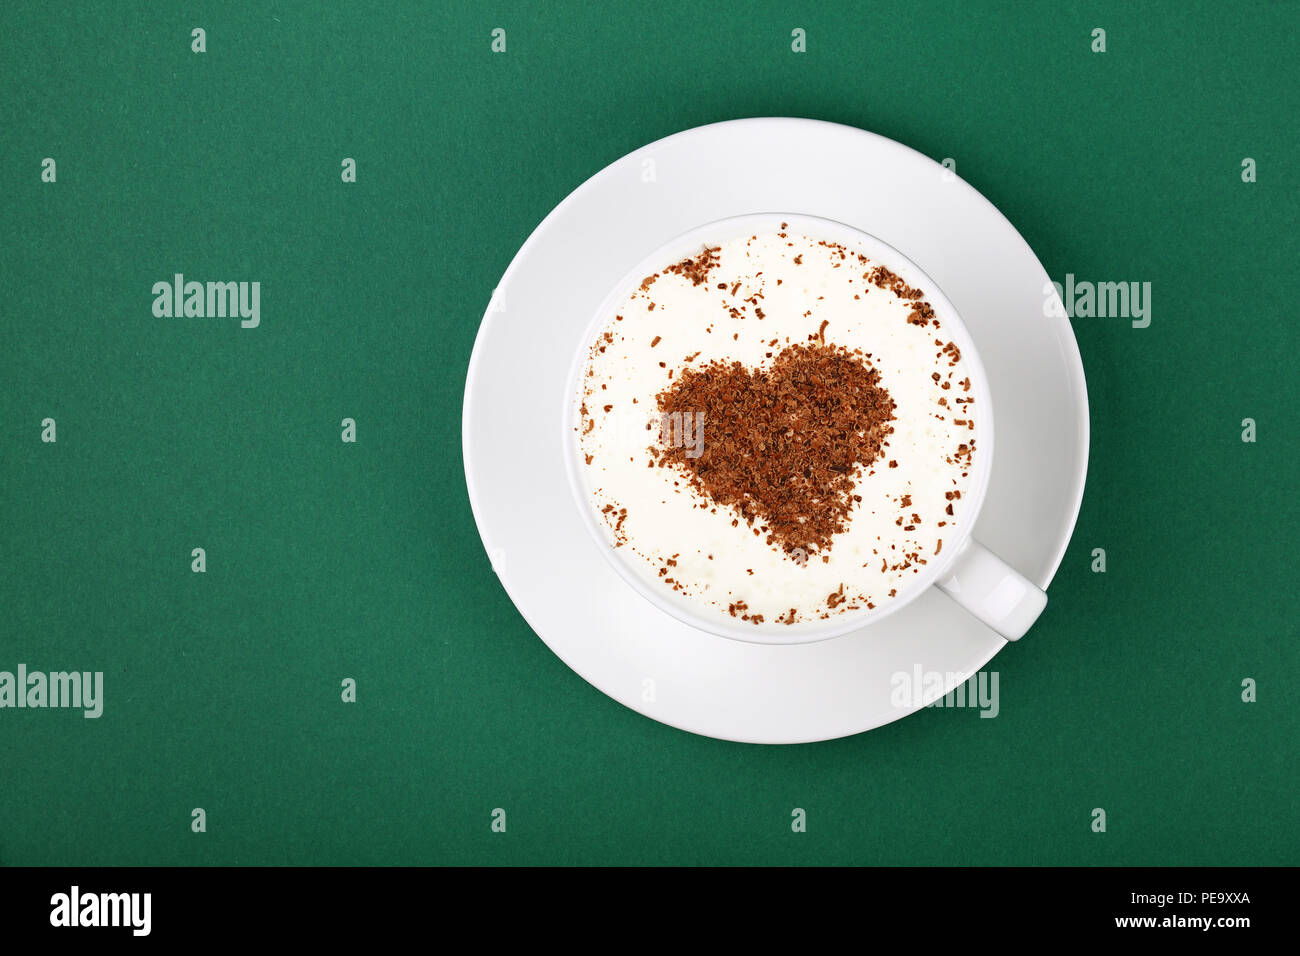 Close up one full white cup of frothy latte cappuccino coffee with heart shaped brown chocolate art, on saucer on green table background, elevated top Stock Photo